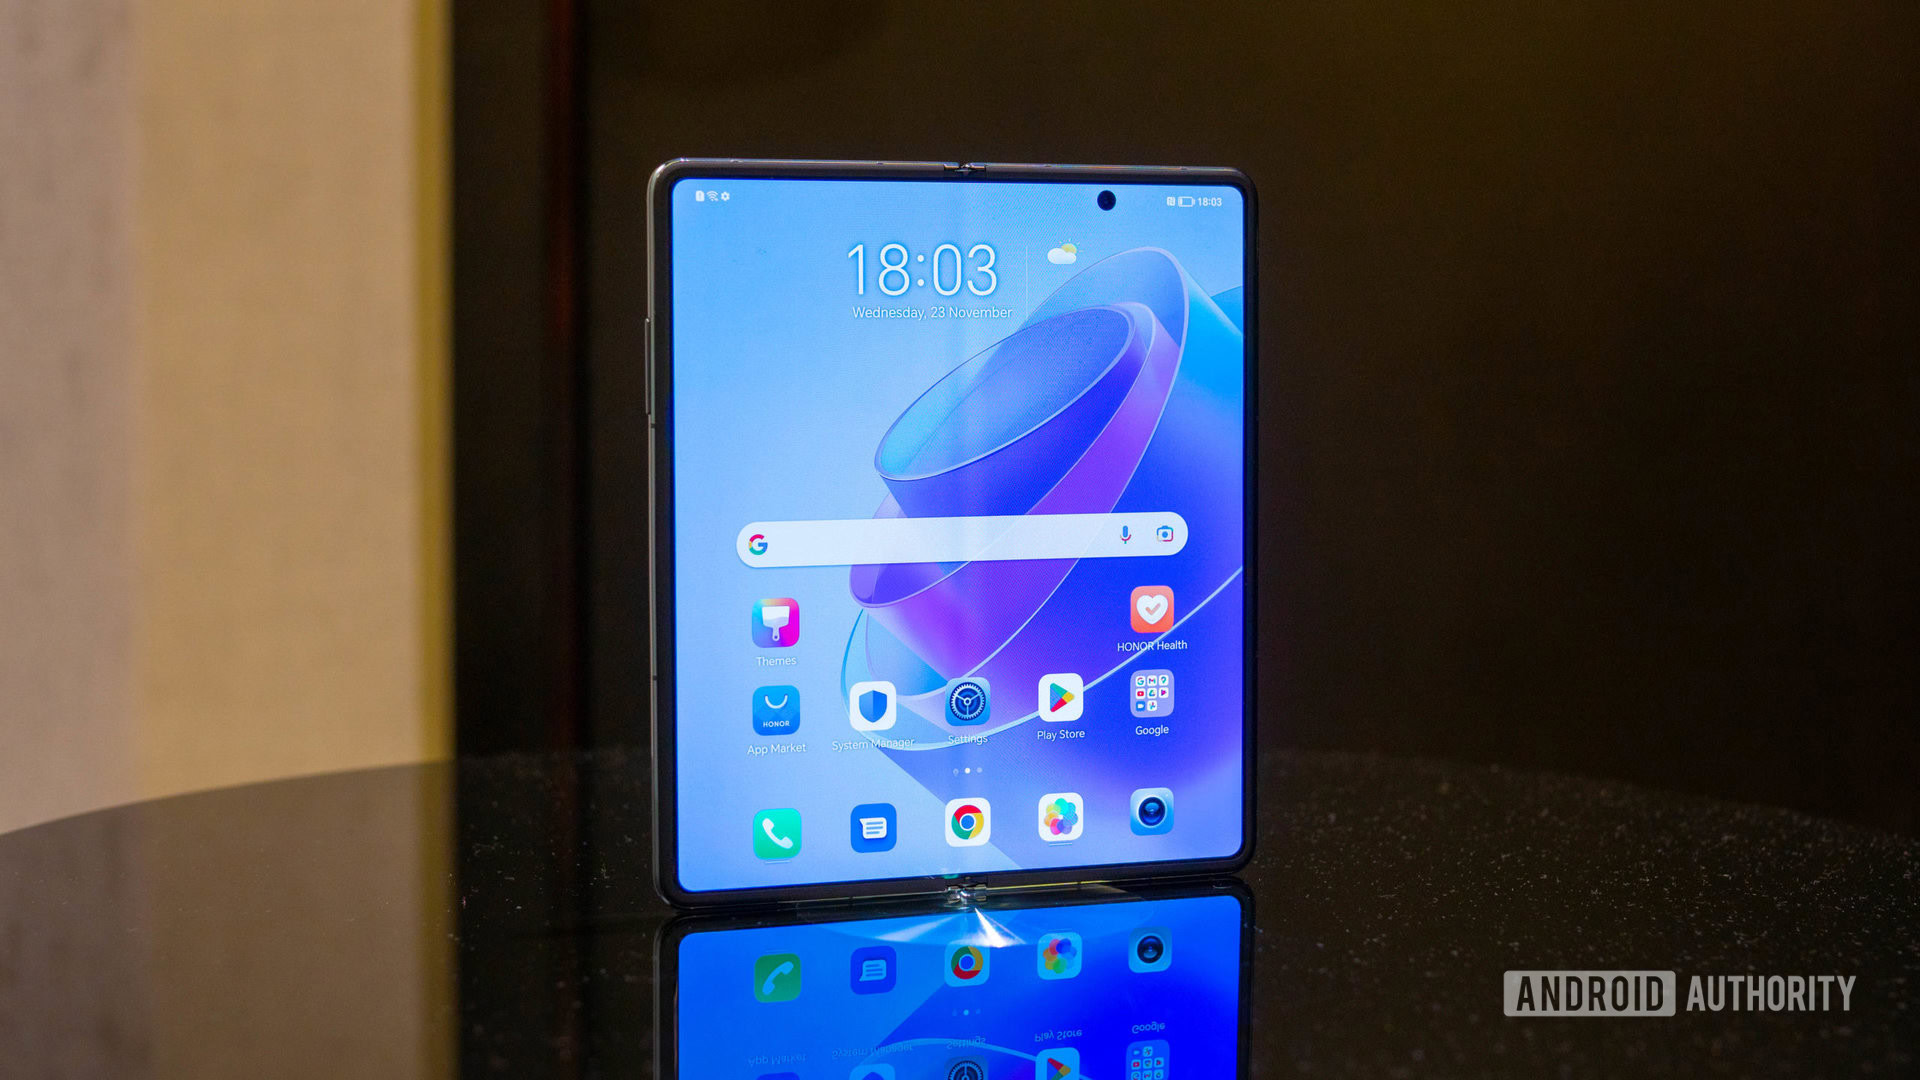 https://www.androidauthority.com/wp-content/uploads/2022/11/Honor-Magic-Vs-home-screen-on-open-internal-display-standing-on-a-table-scaled.jpg